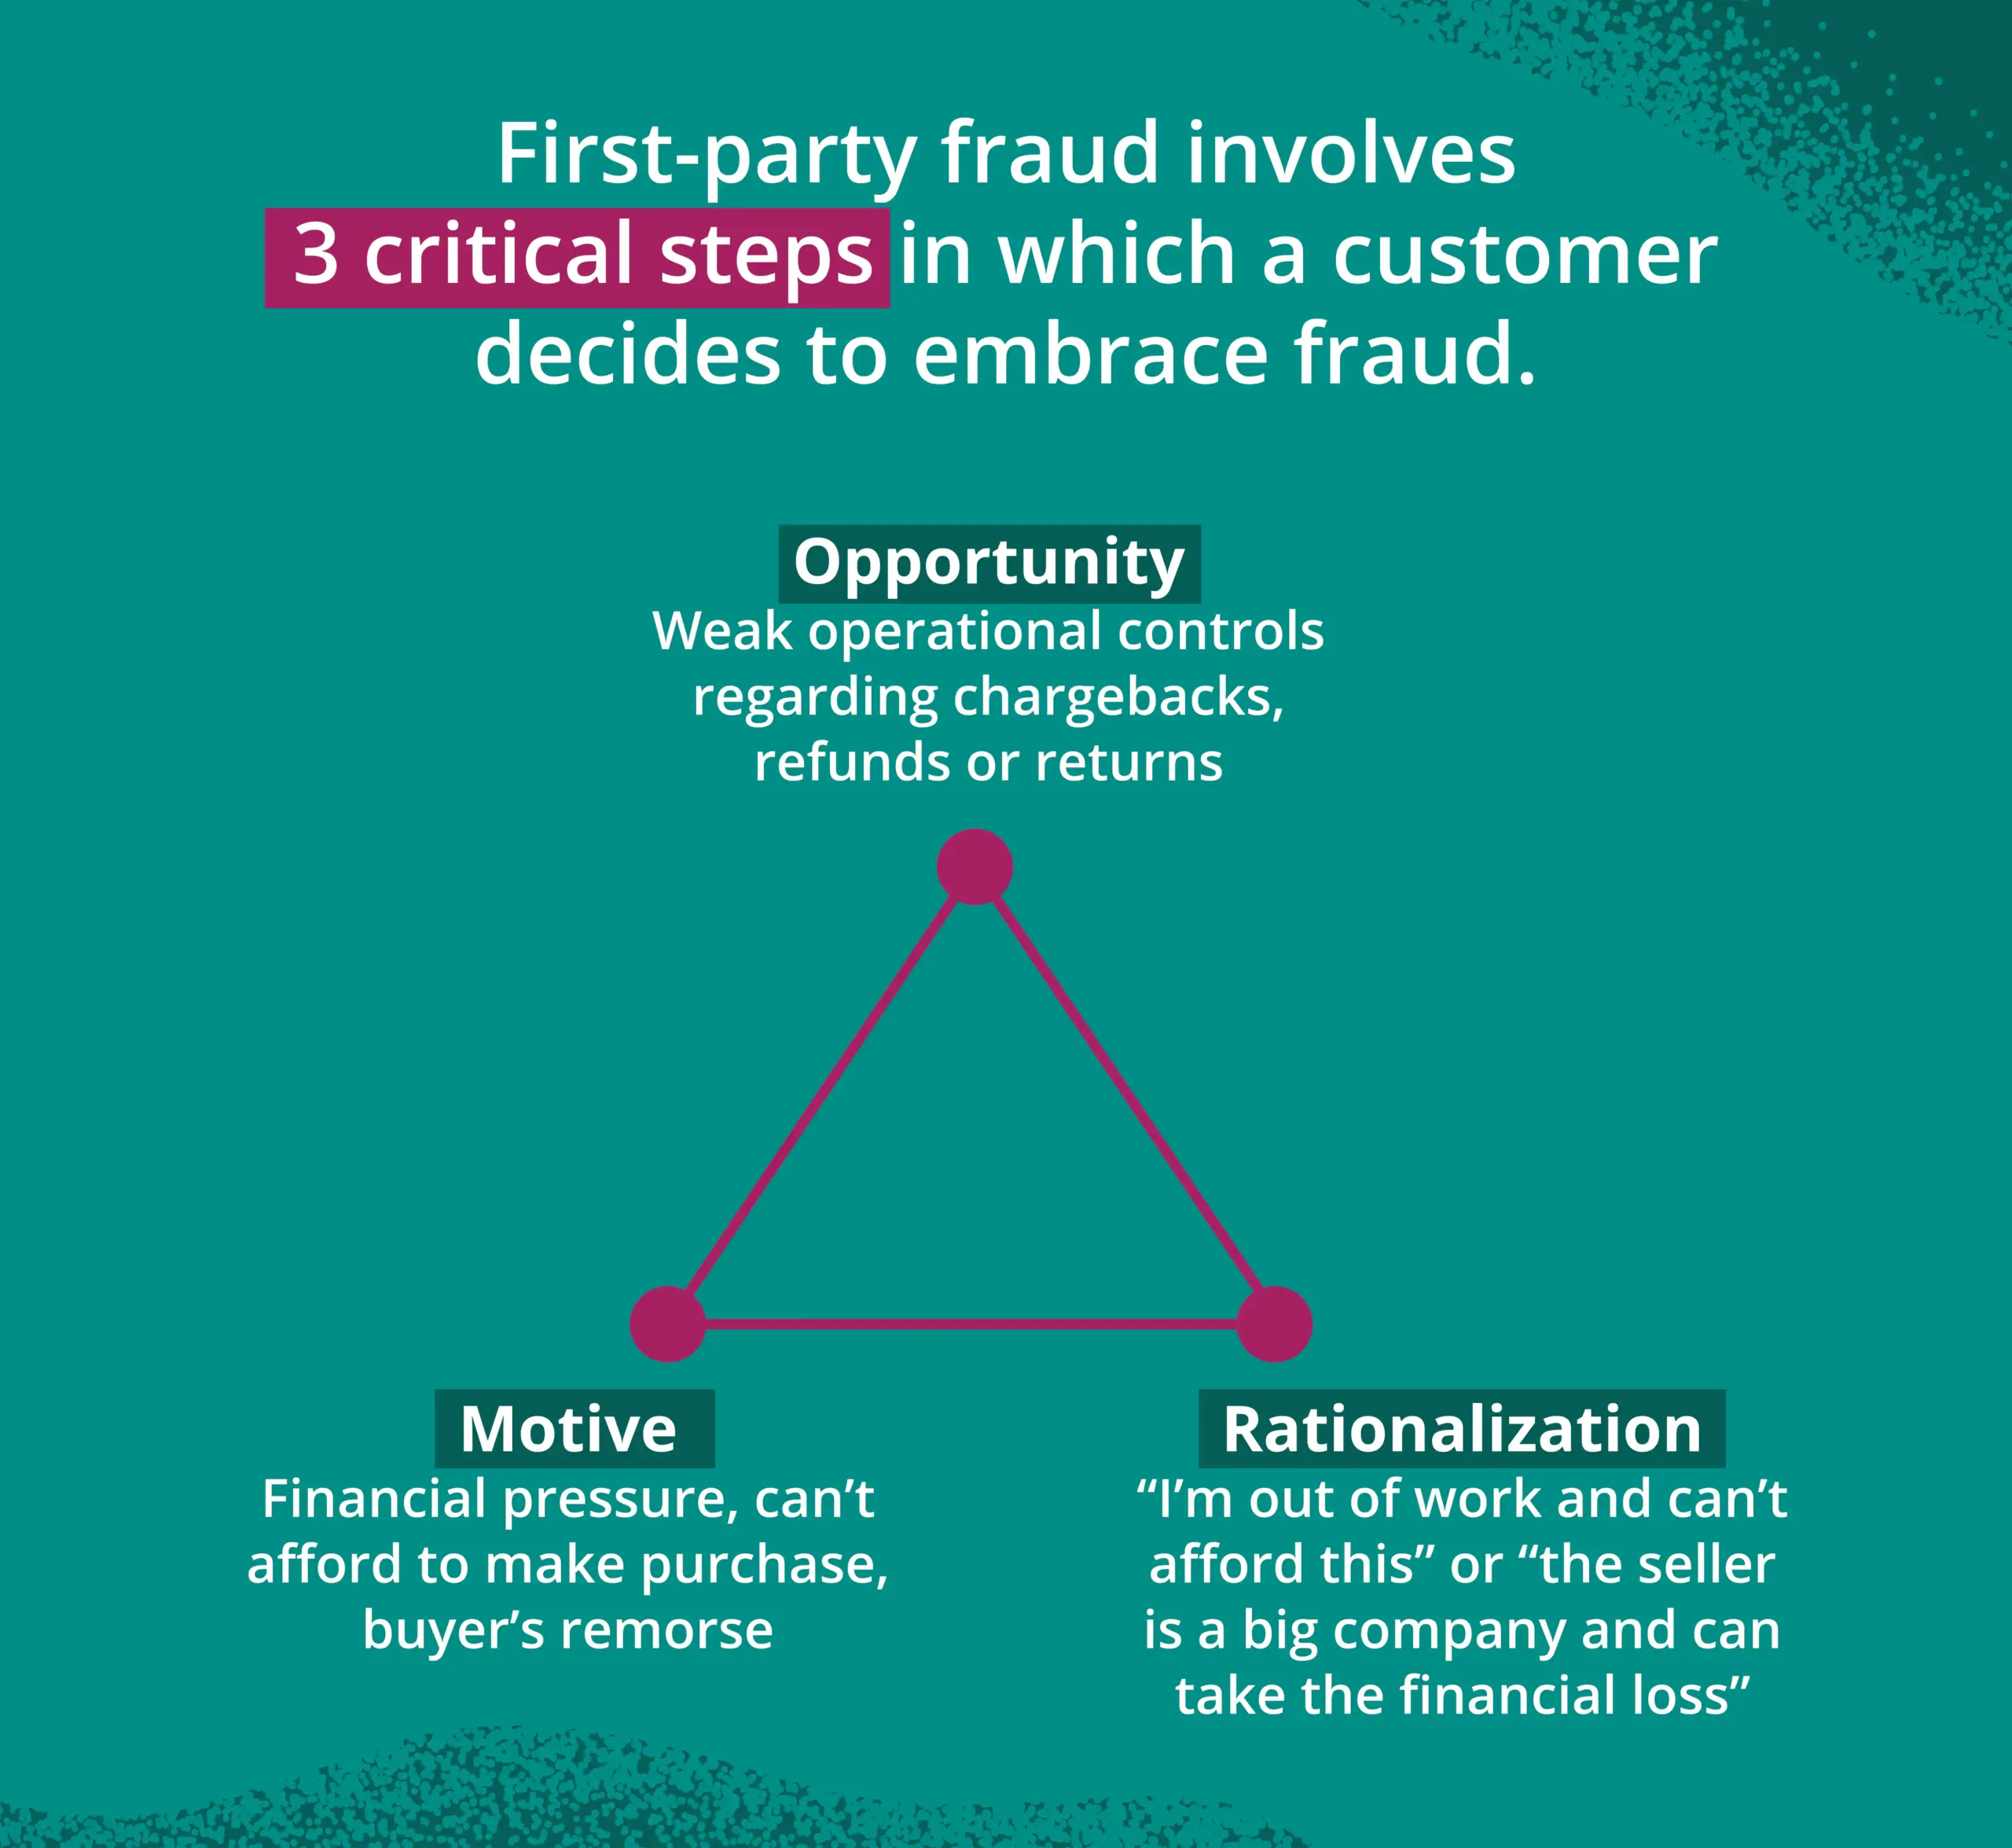 Illustration outlining how first-party fraud involves 3 key steps: Opportunity, Rationalization, and Motive